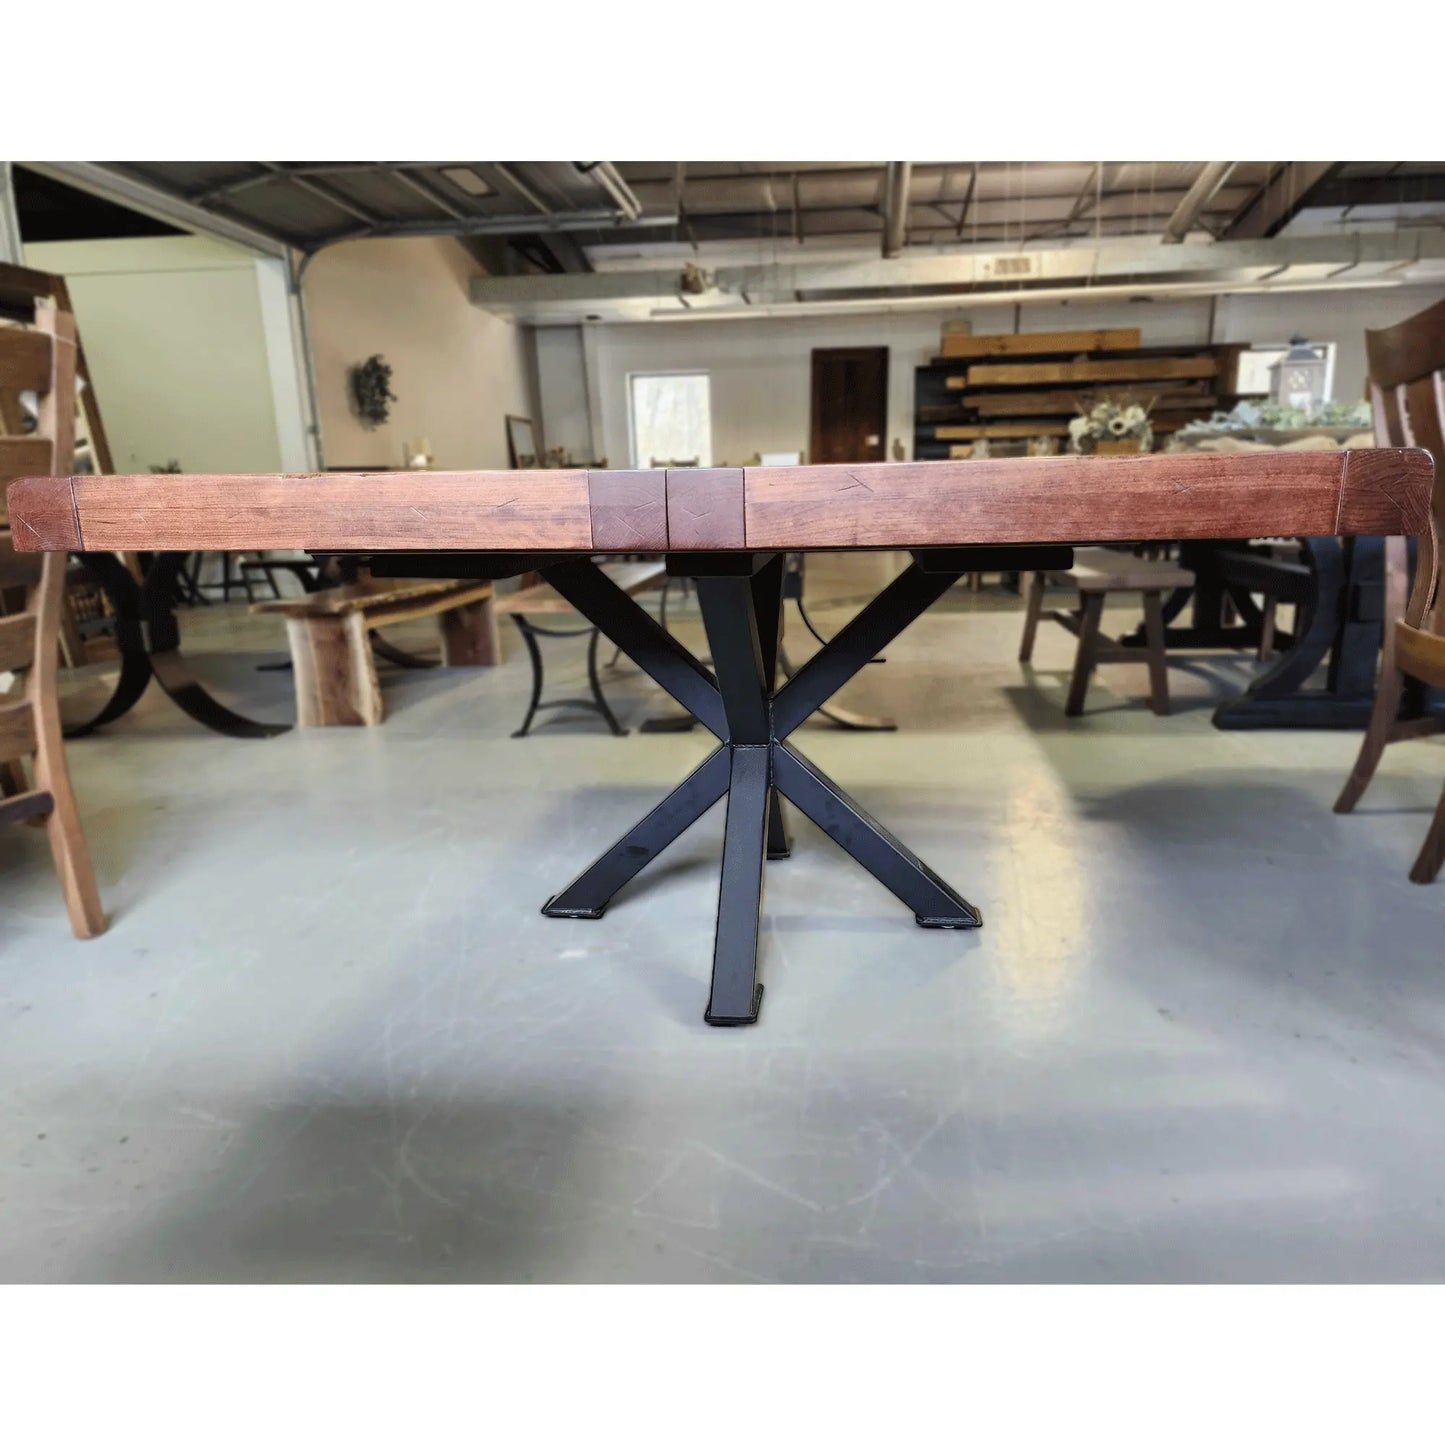 54" Bennet Square Extendable Dining Table, Boston Stain